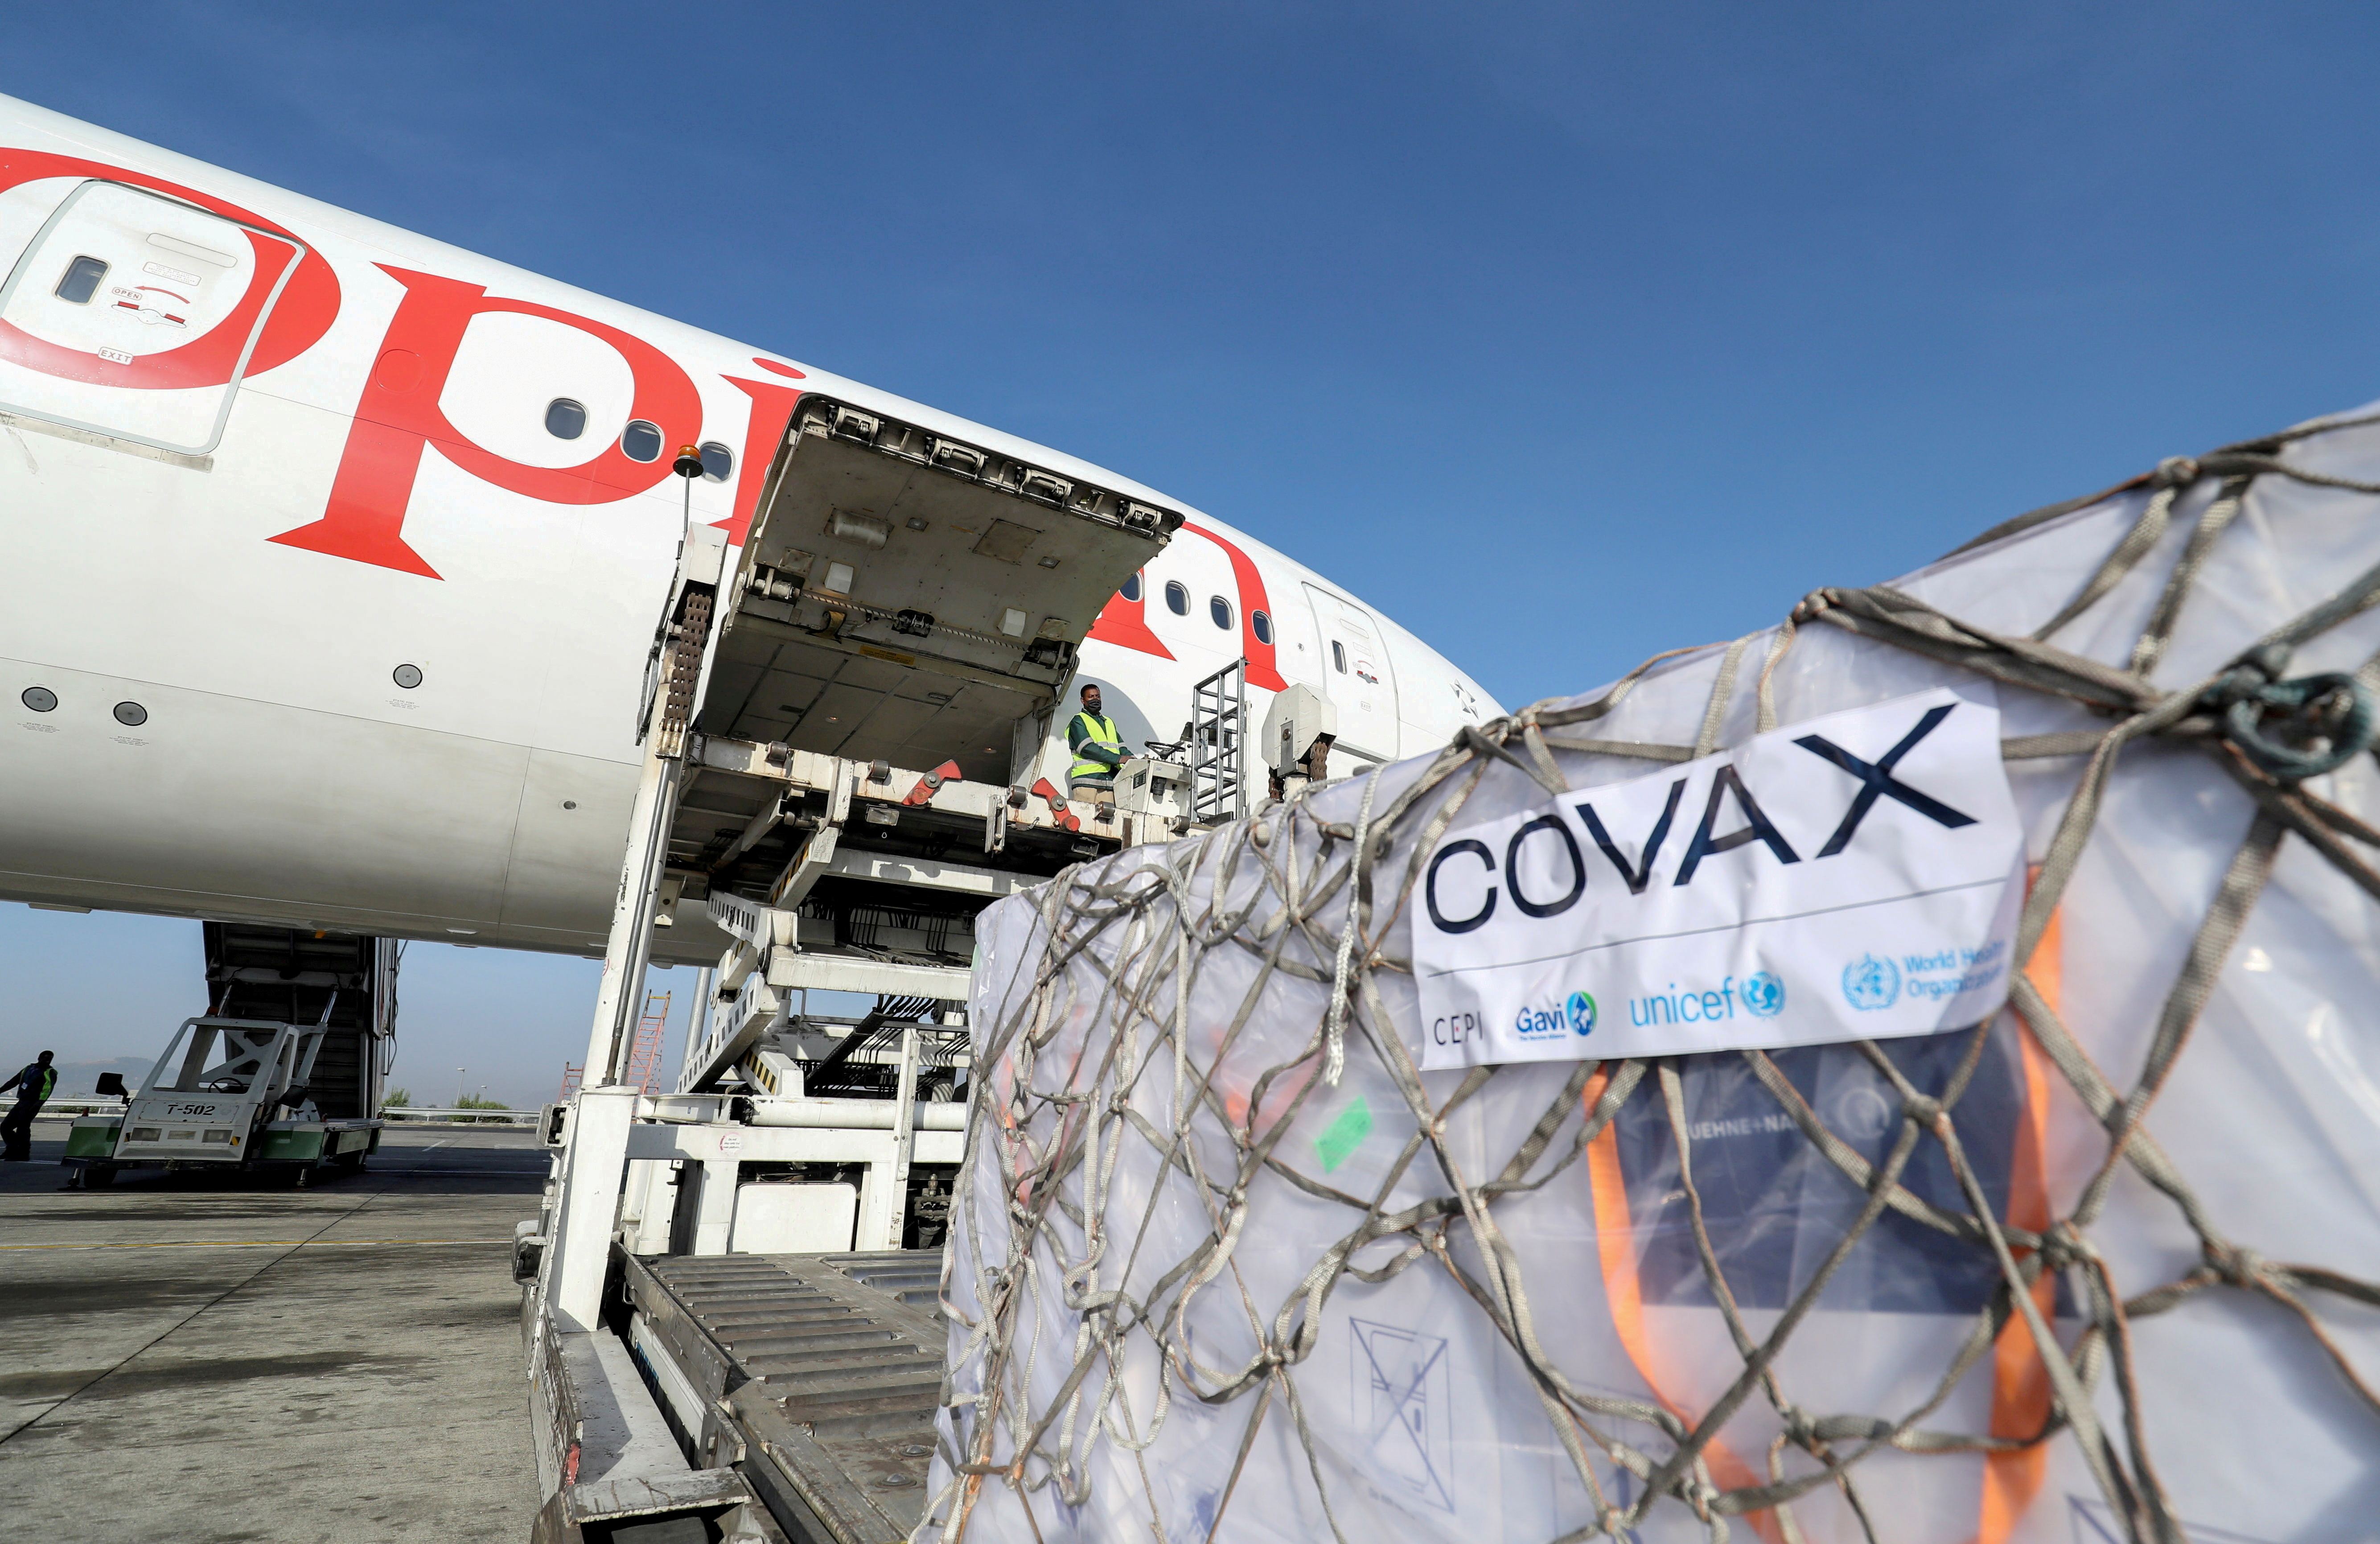 AstraZeneca coronavirus vaccines from the COVAX vaccine-sharing scheme are unloaded from a cargo plane at Bole International Airport in Ethiopia